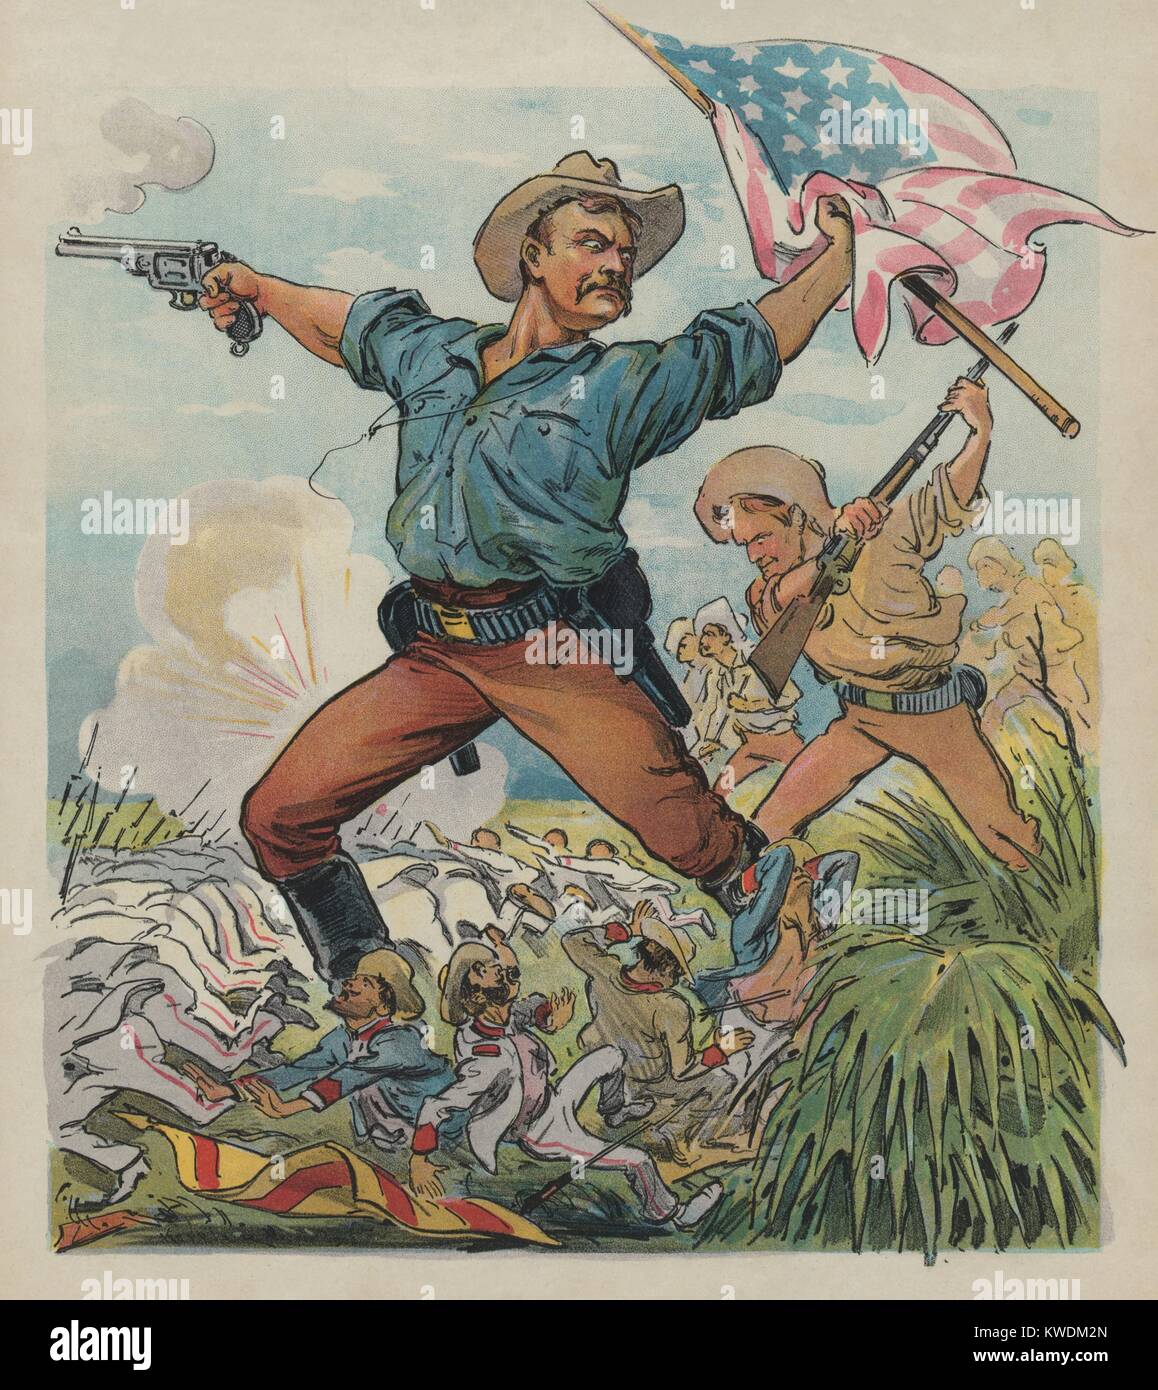 THE ROUGH RIDERS, Puck Magazine illustration, July 27, 1898. The non-factual made-up image in this political cartoon depicts Theodore Roosevelt leading a charge, trampling tiny Spanish soldiers underfoot during the Spanish American War in Cuba (BSLOC_2017_10_38) Stock Photo